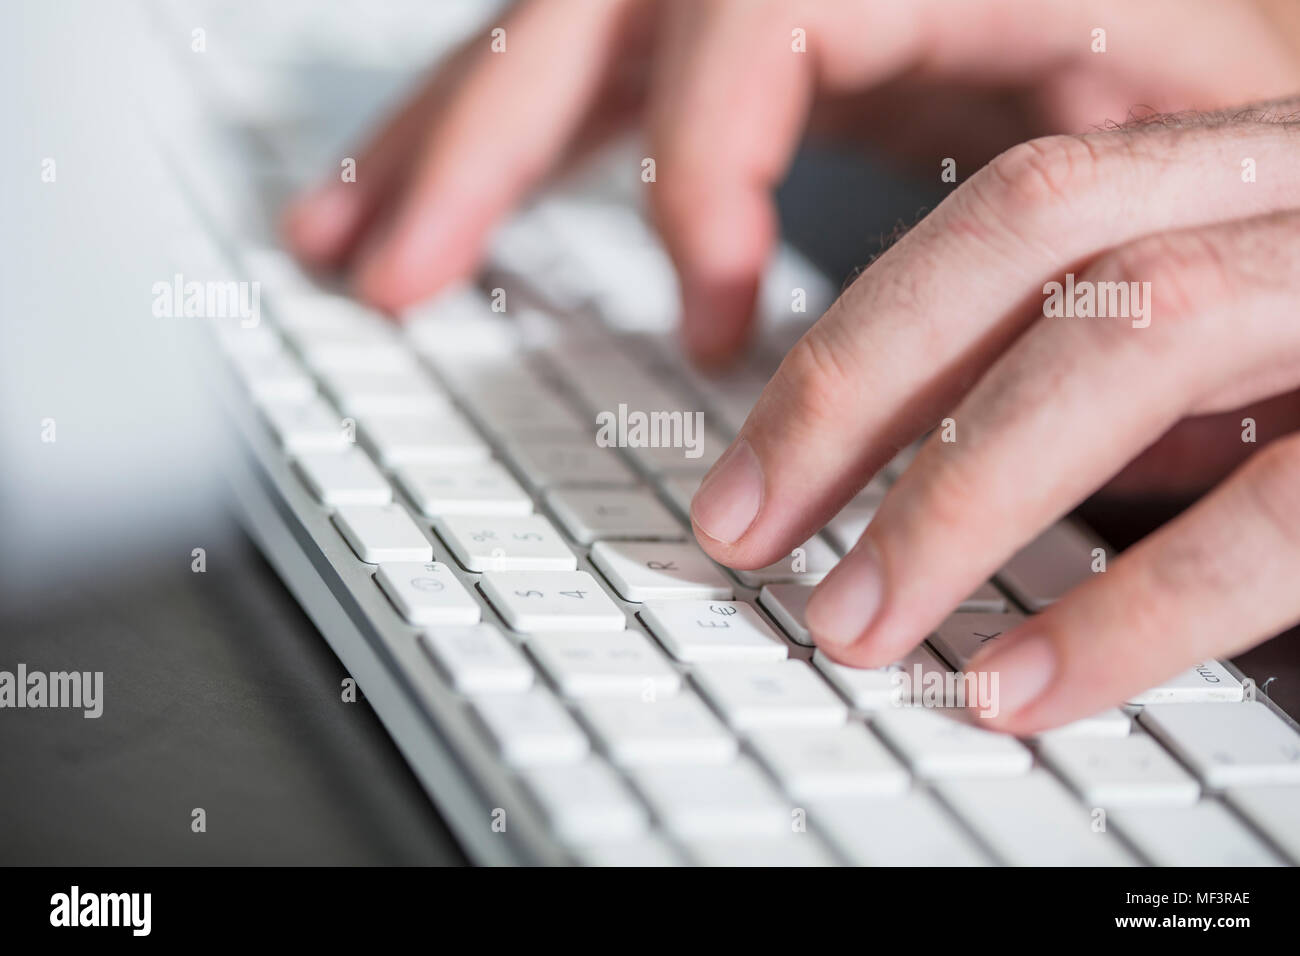 Hands on keyboard, close-up Stock Photo